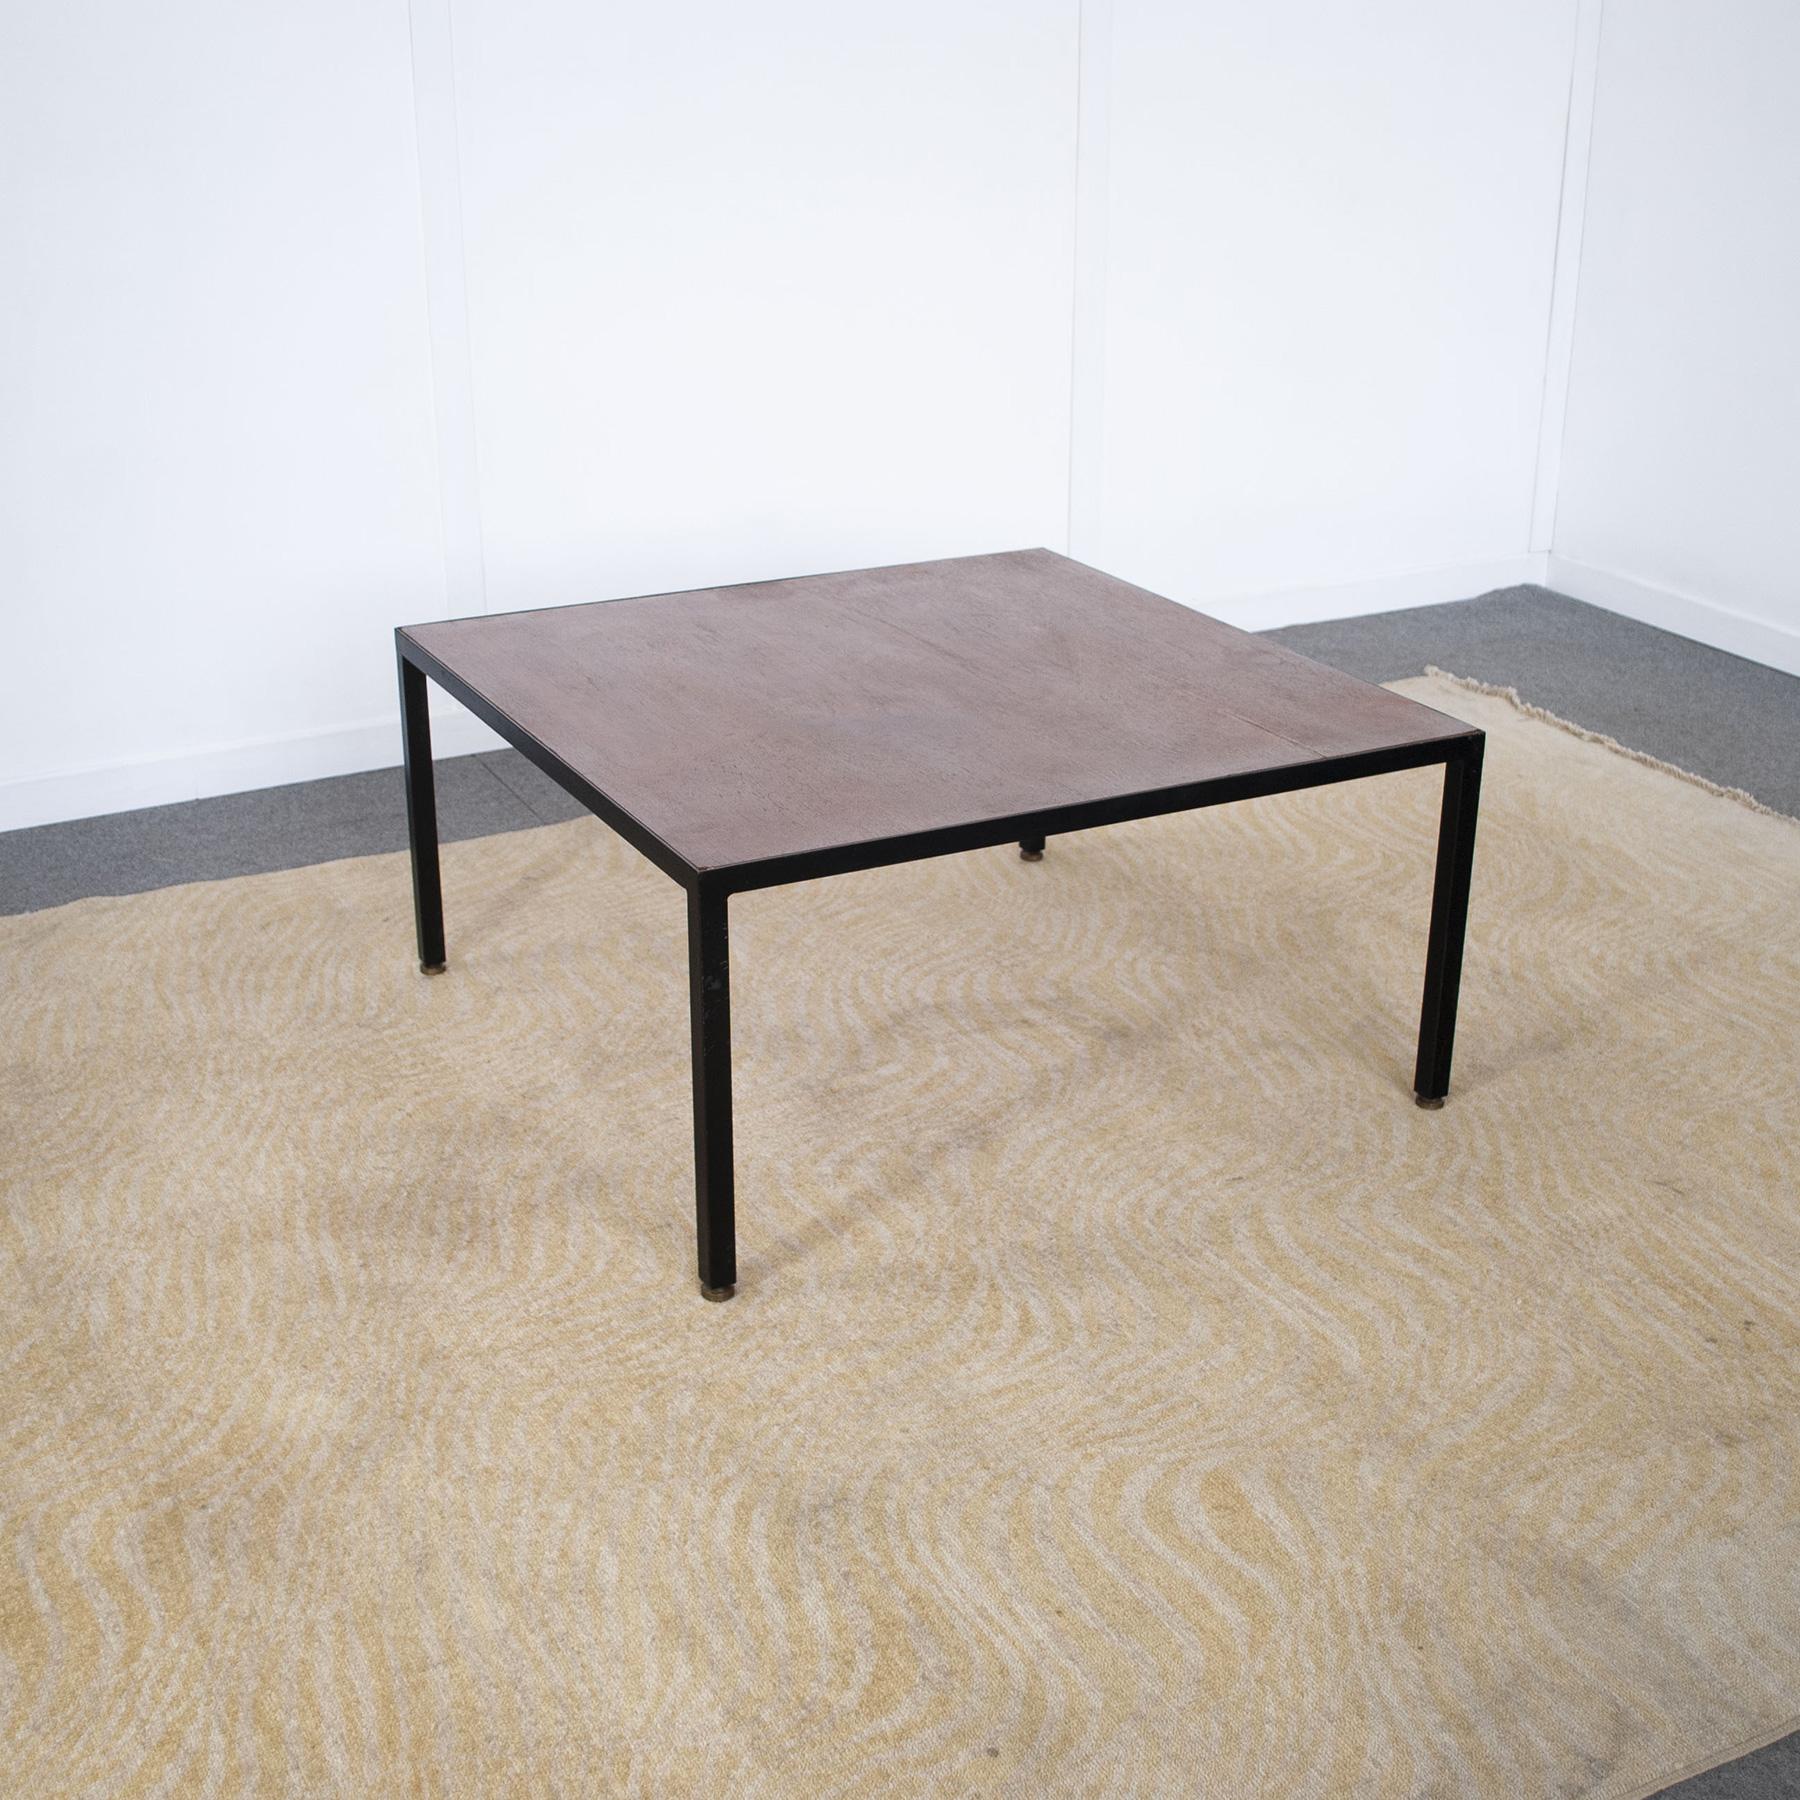 Mid-20th Century Coffee Table Italian Midcentury from the Sixties For Sale